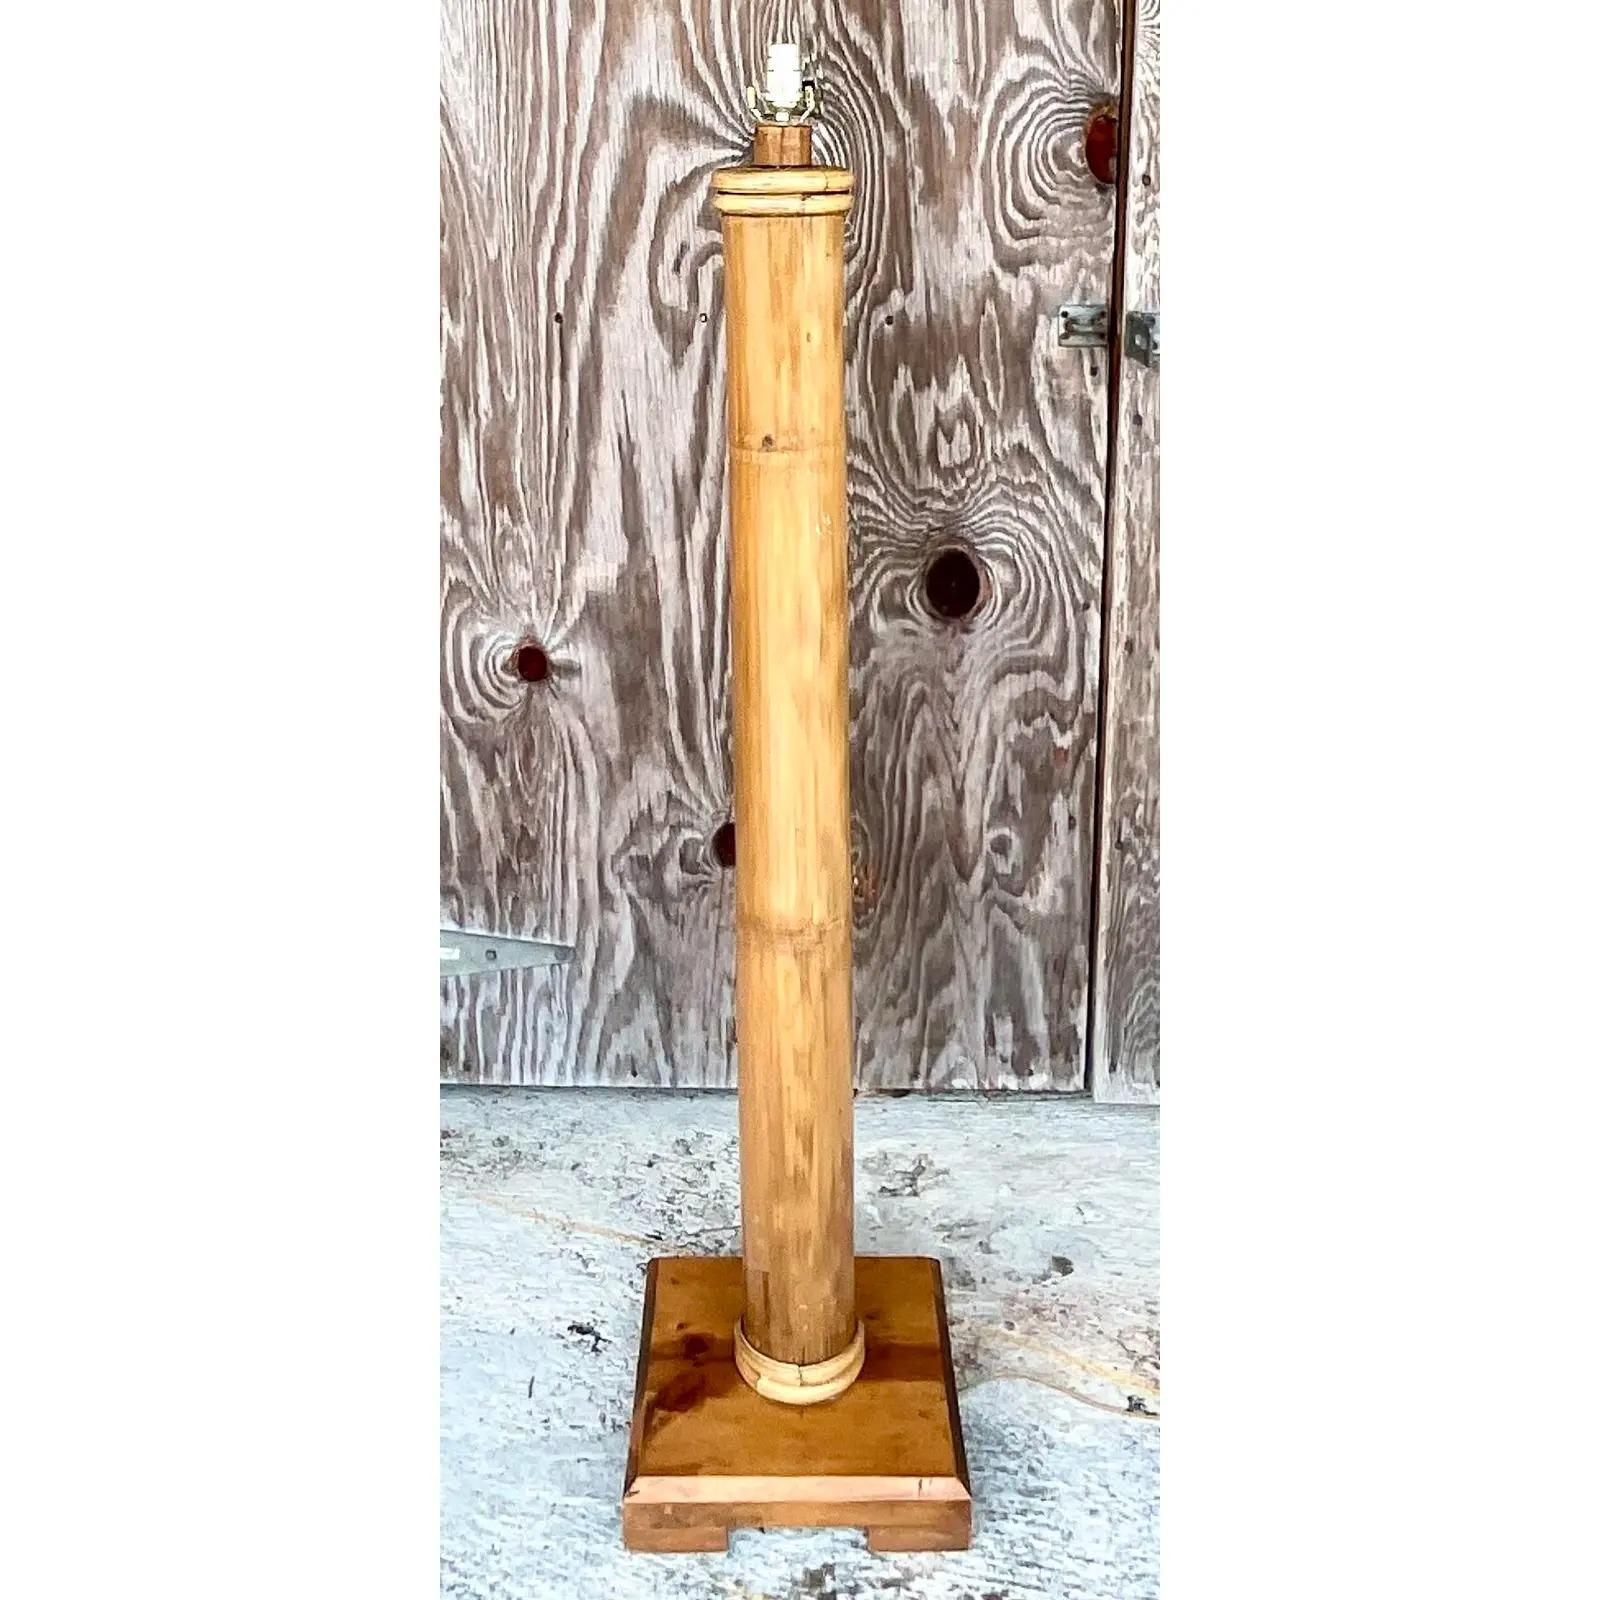 Spectacular vintage Coastal floor lamp. One commanding stalk of elephant bamboo on a chic pine plinth. The height of classic Palm Beach. Acquired from a Palm Beach estate.